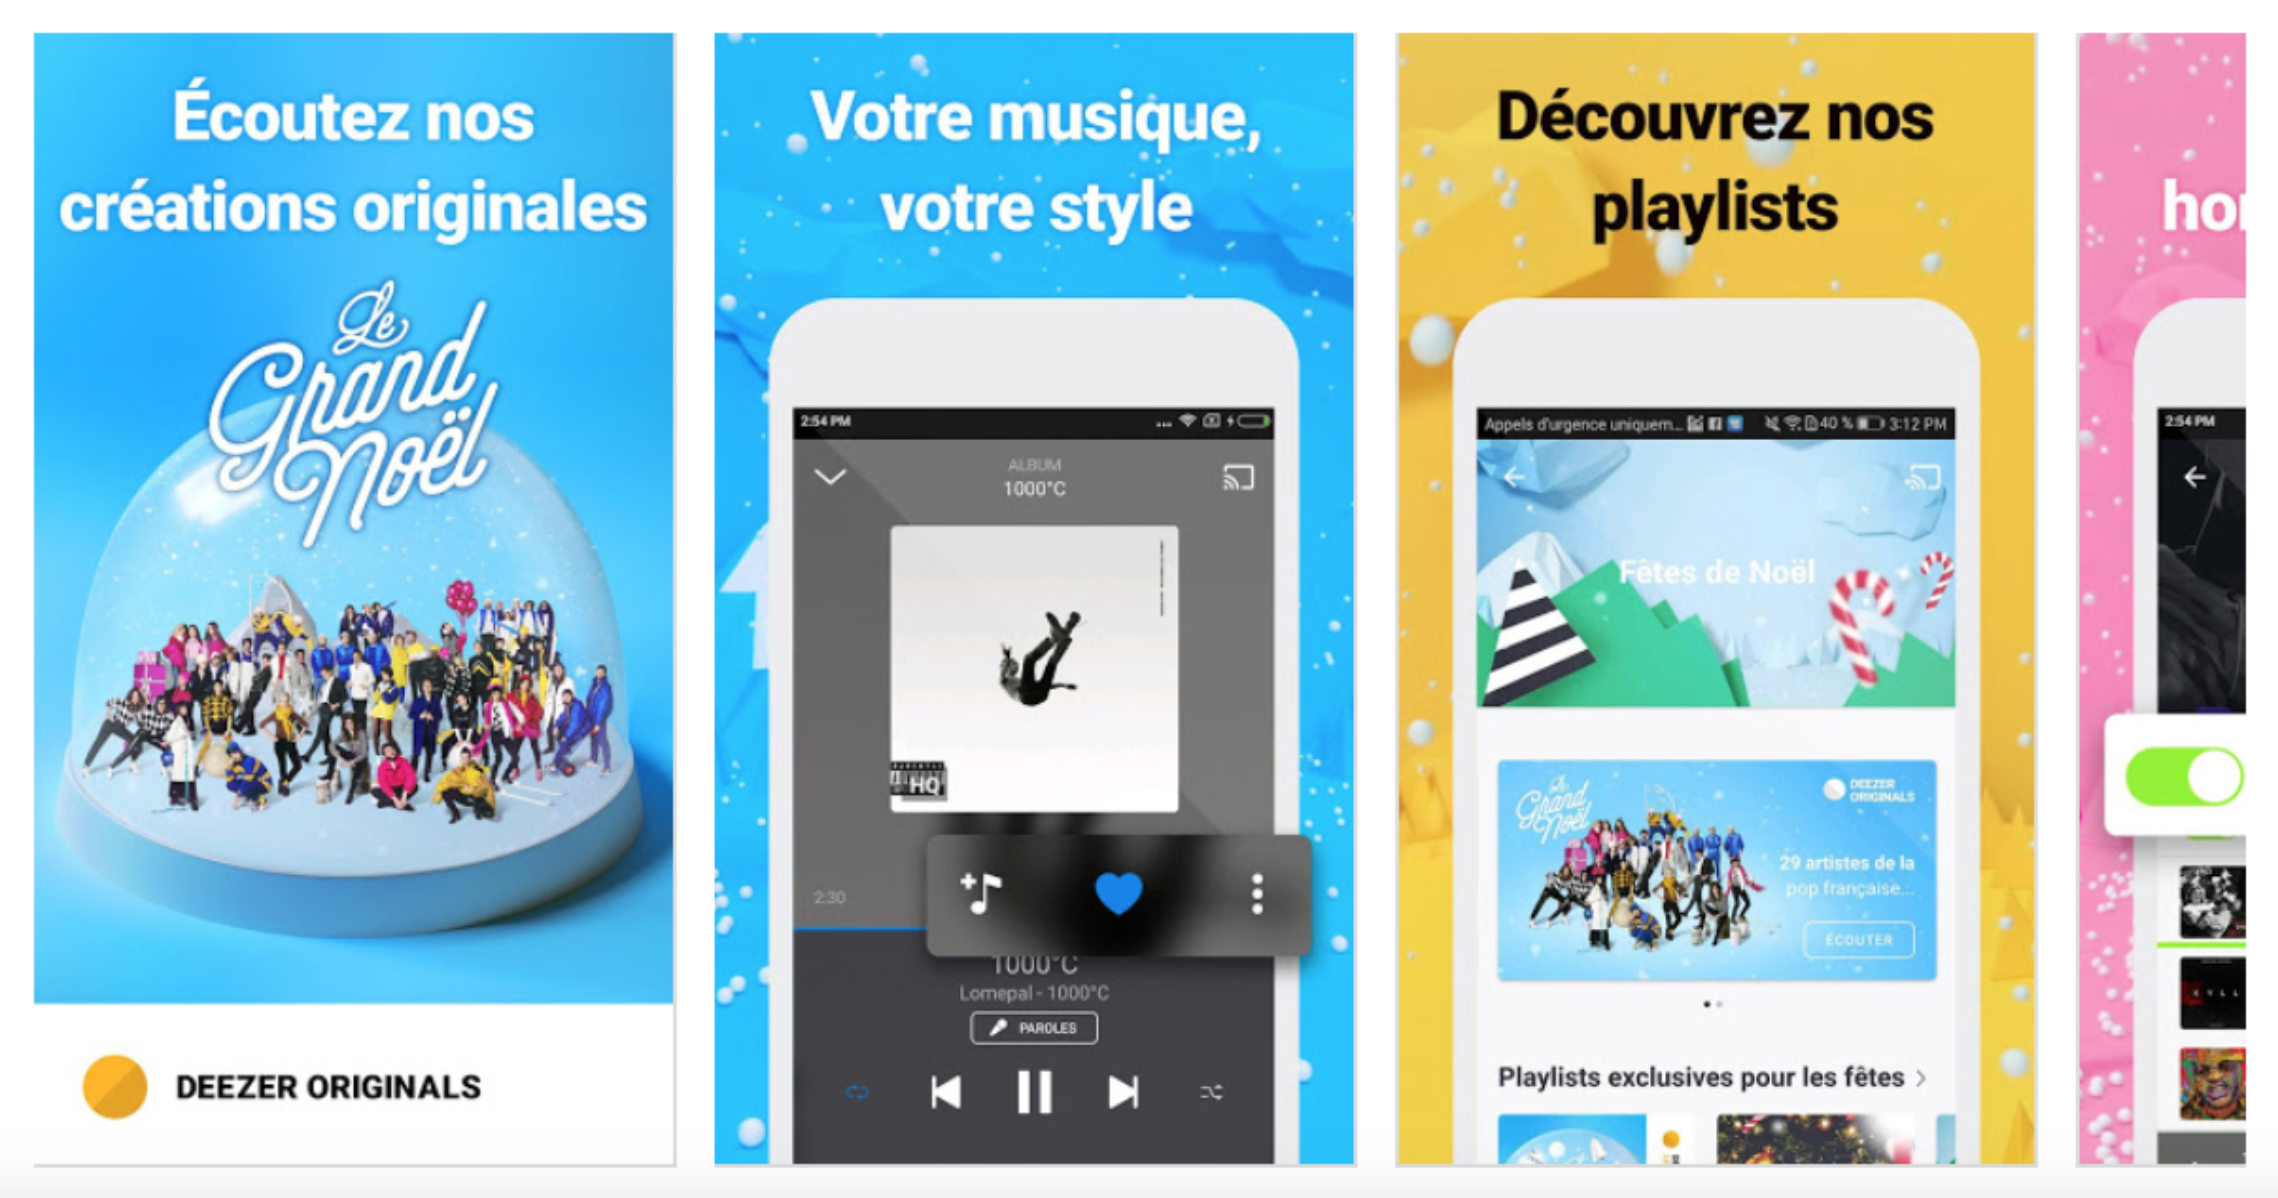 in December 2018, Deezer redesigned its Google Play screenshots to match their TV campaign